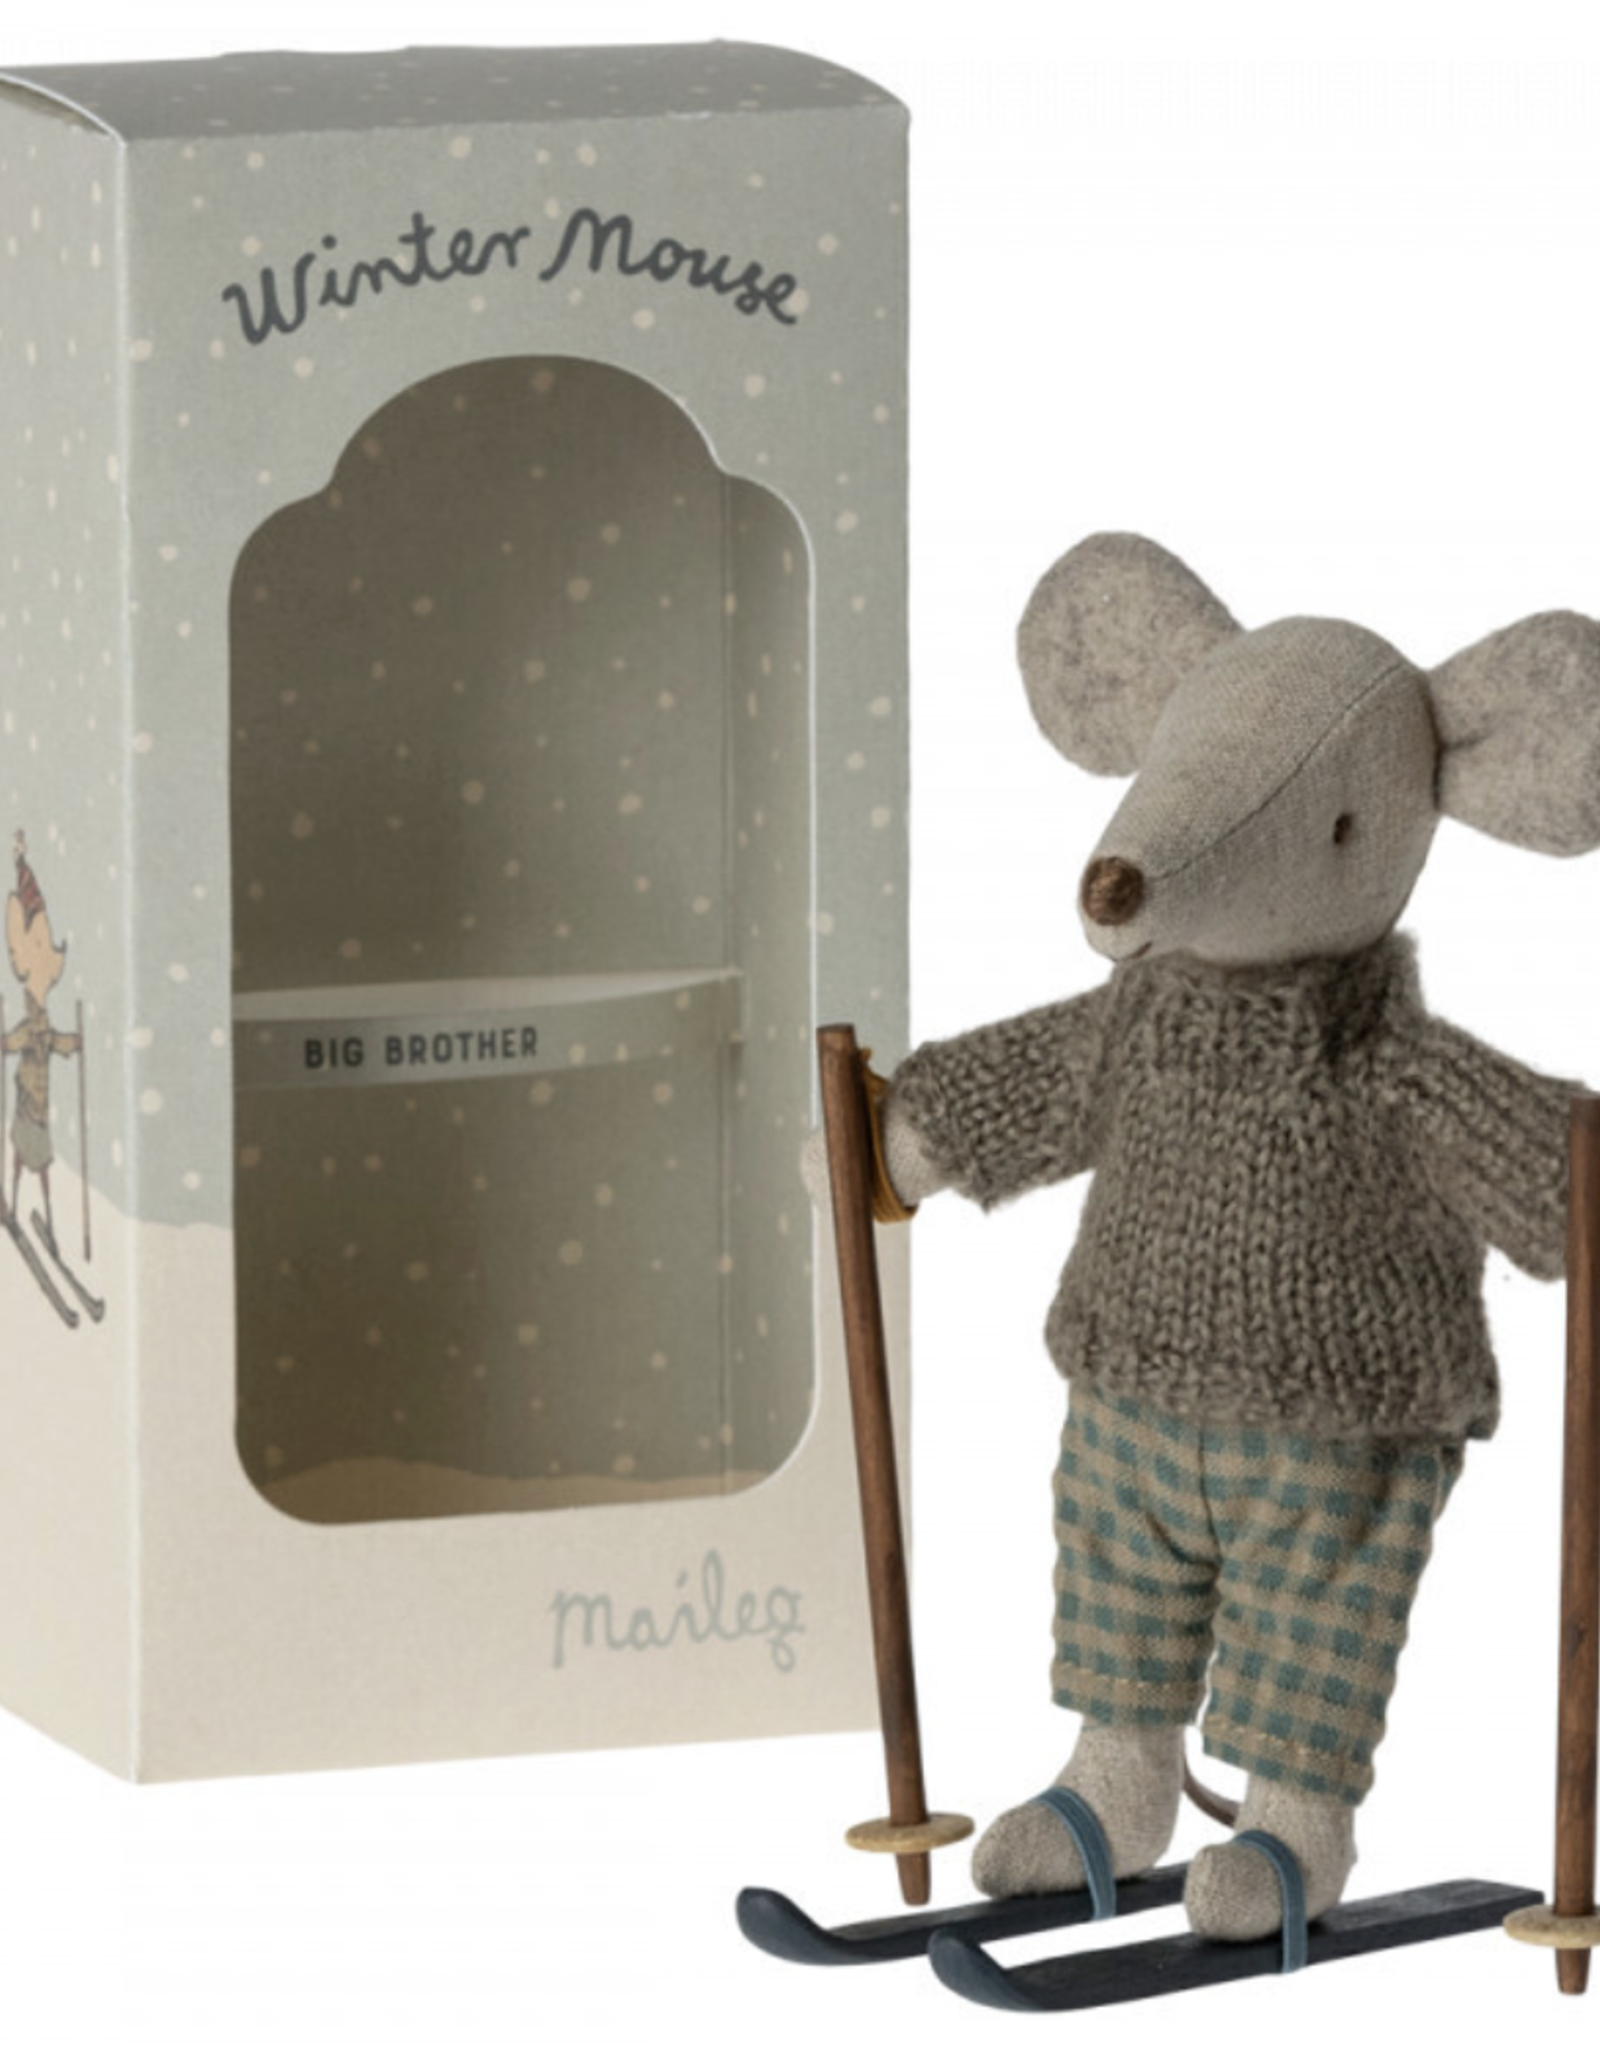 Maileg winter mouse with ski set, big brother